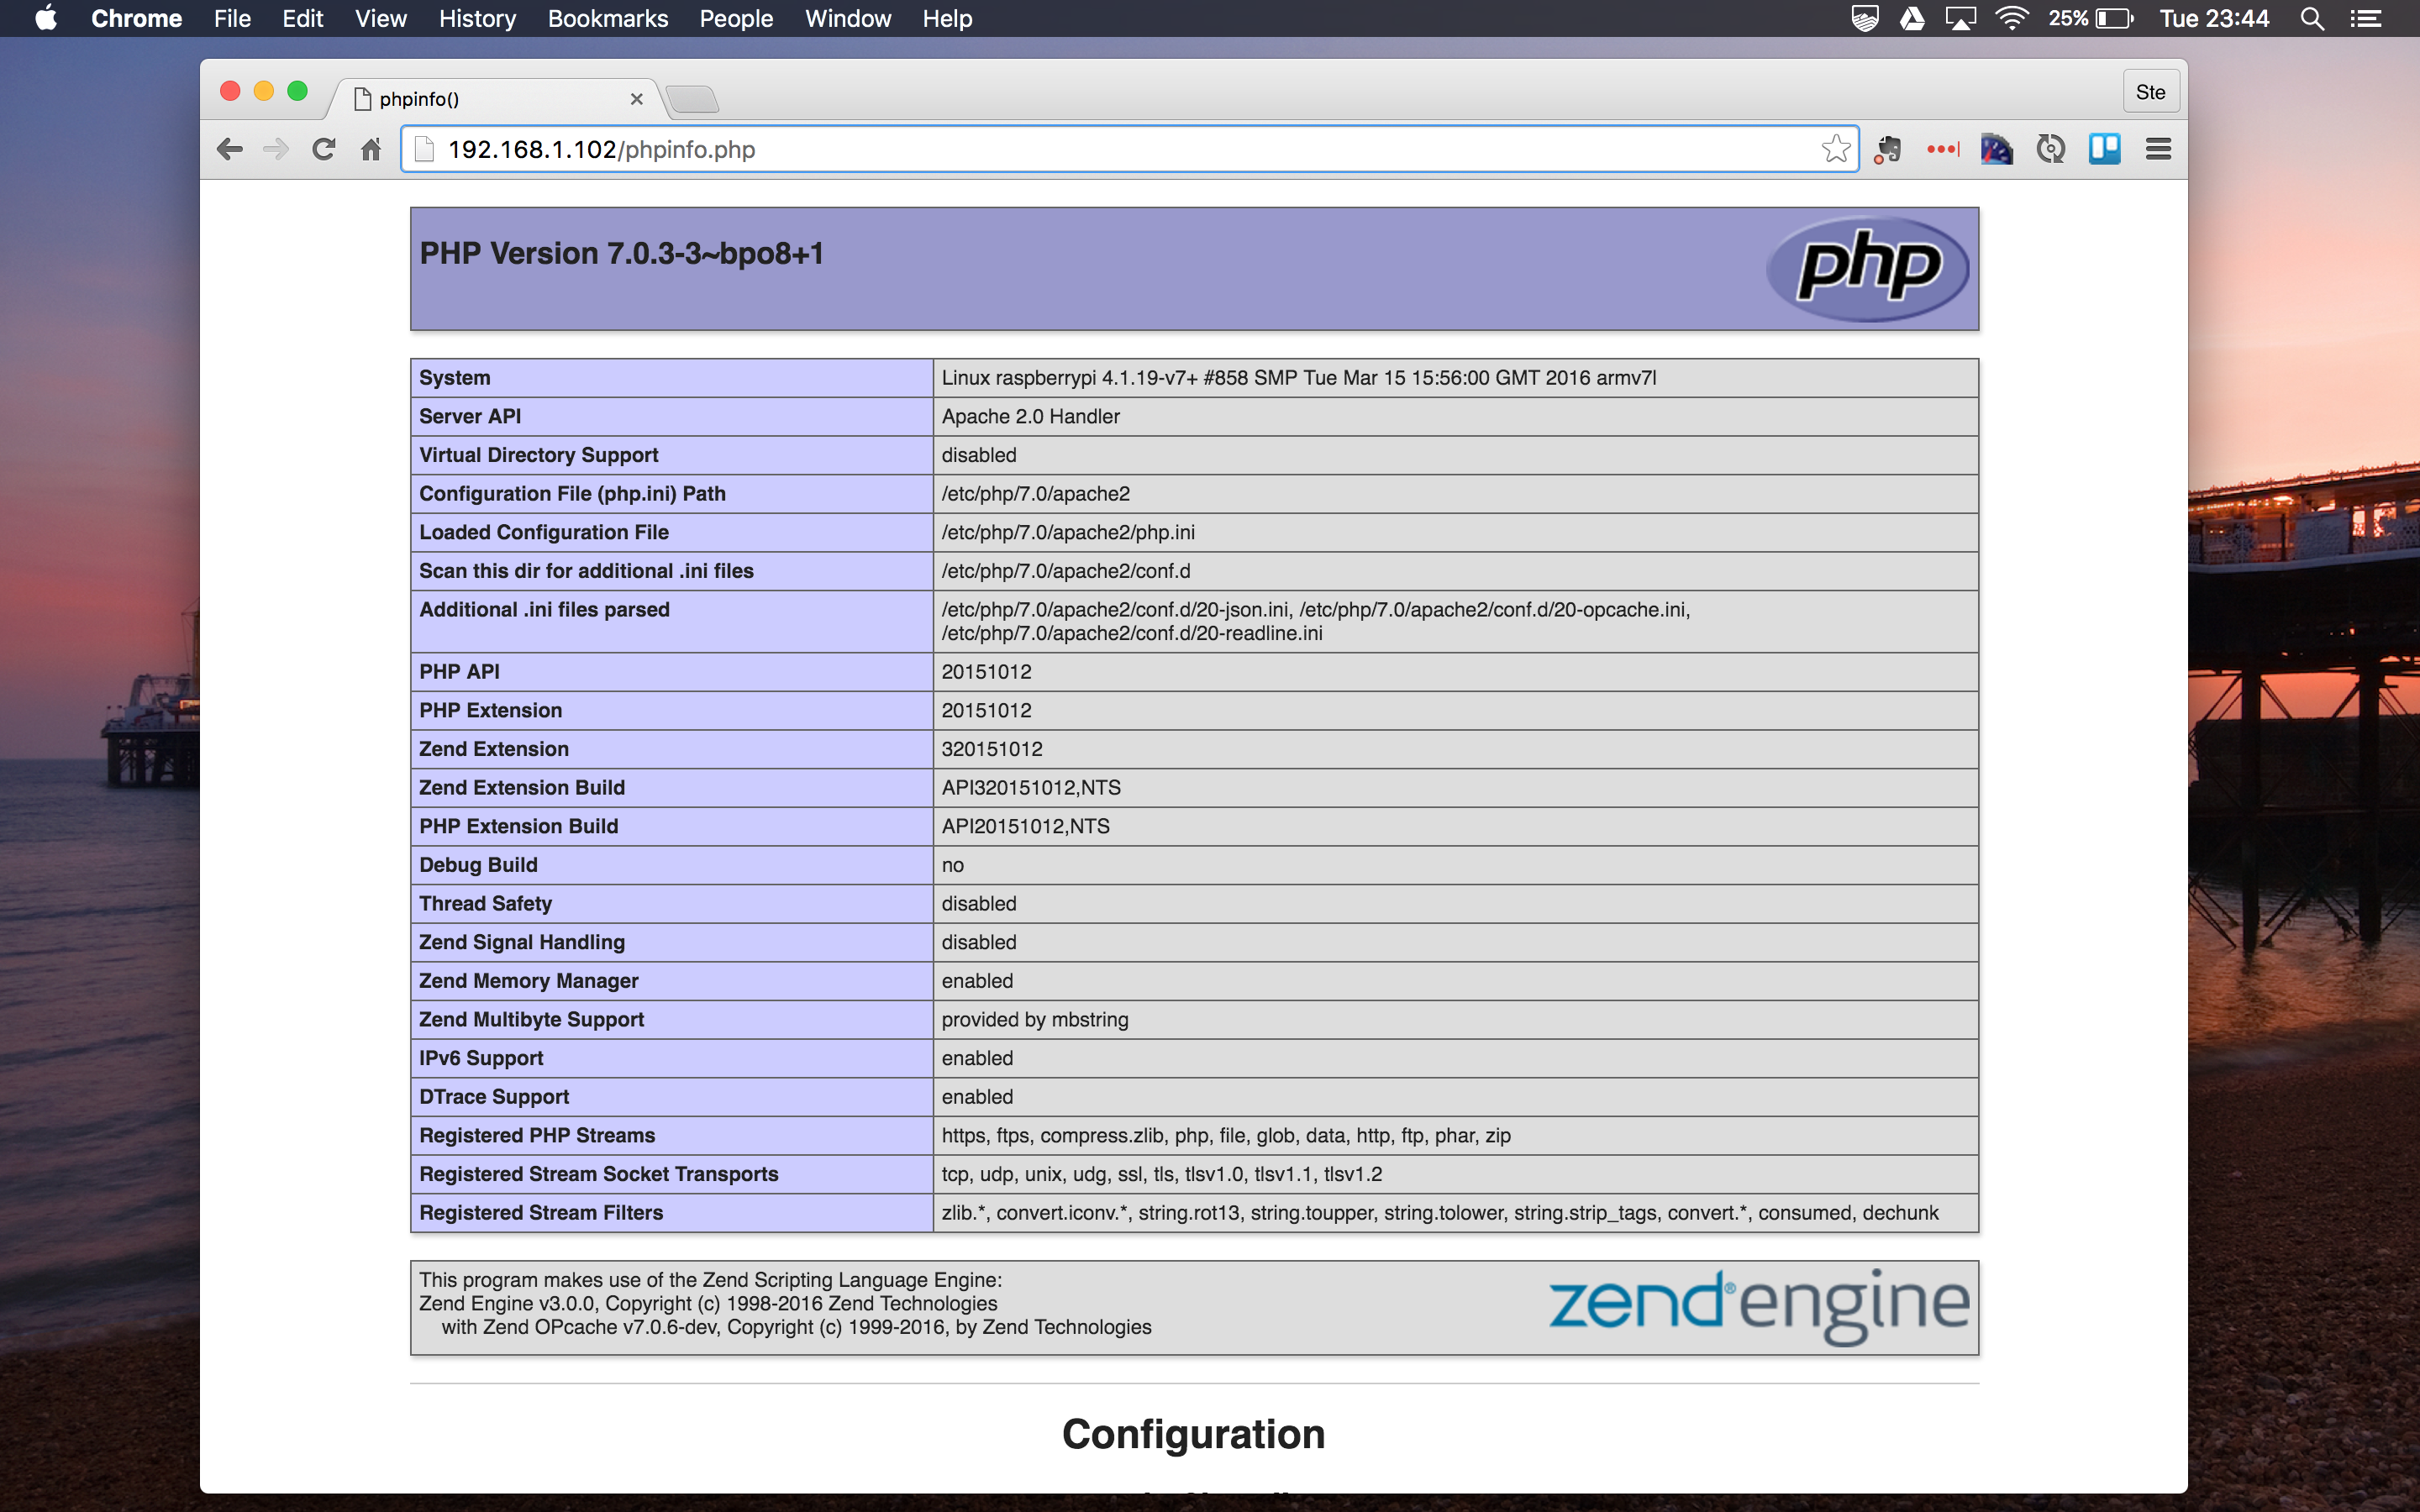 raspberrypi php5 has no installation candidate